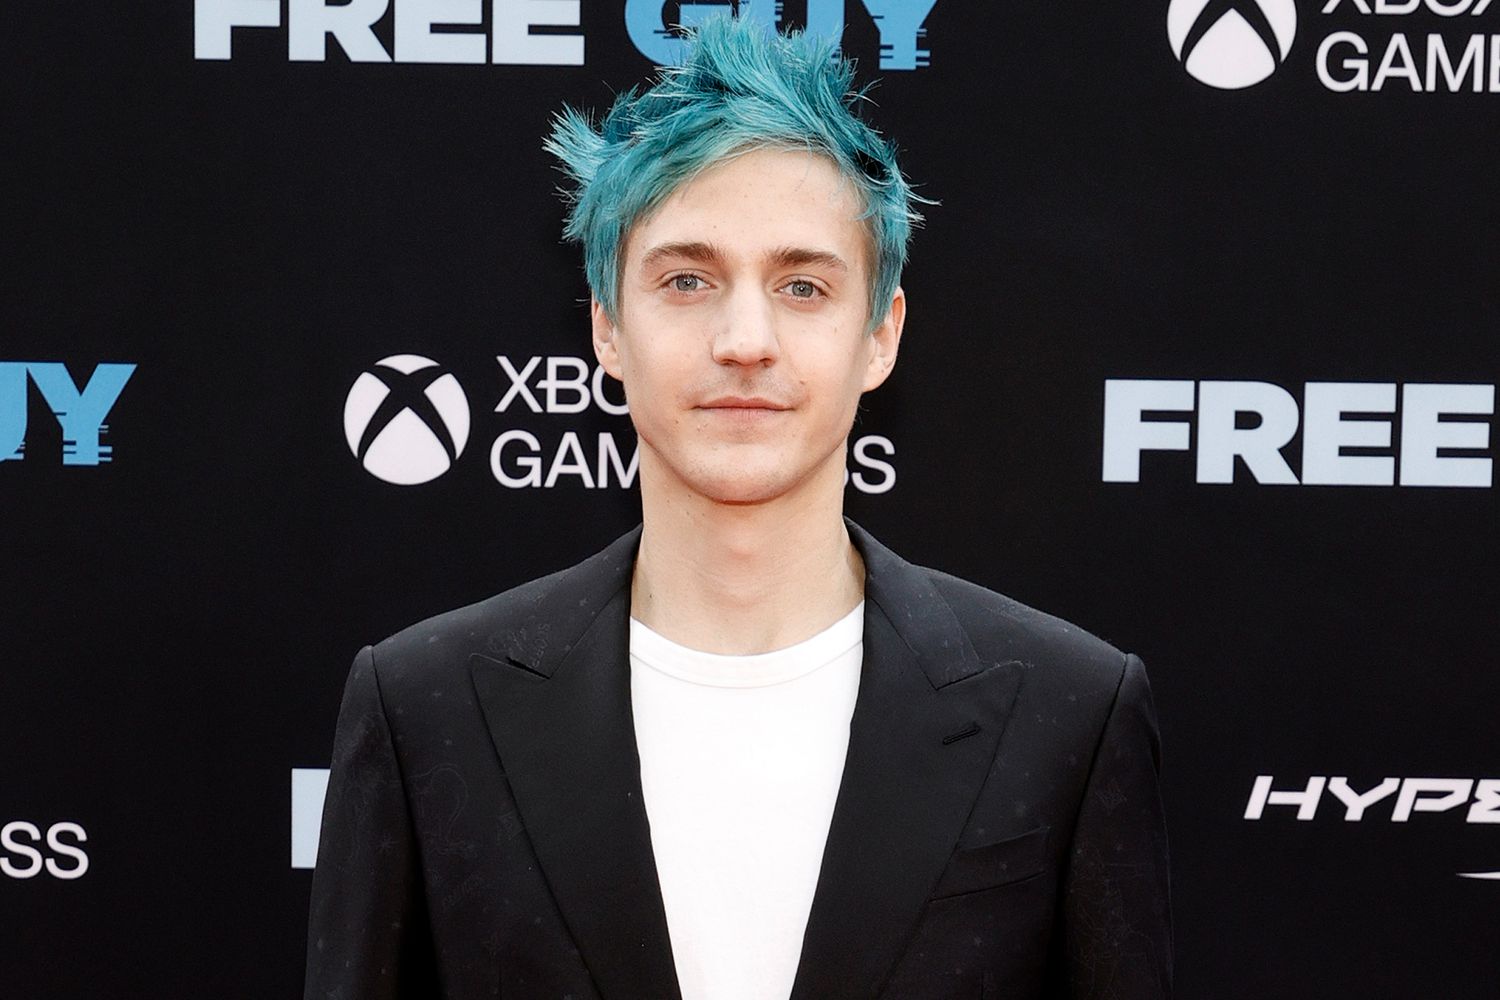 Ninja, Top Twitch Streamer, Reveals He Has Skin Cancer at 32 [Video]